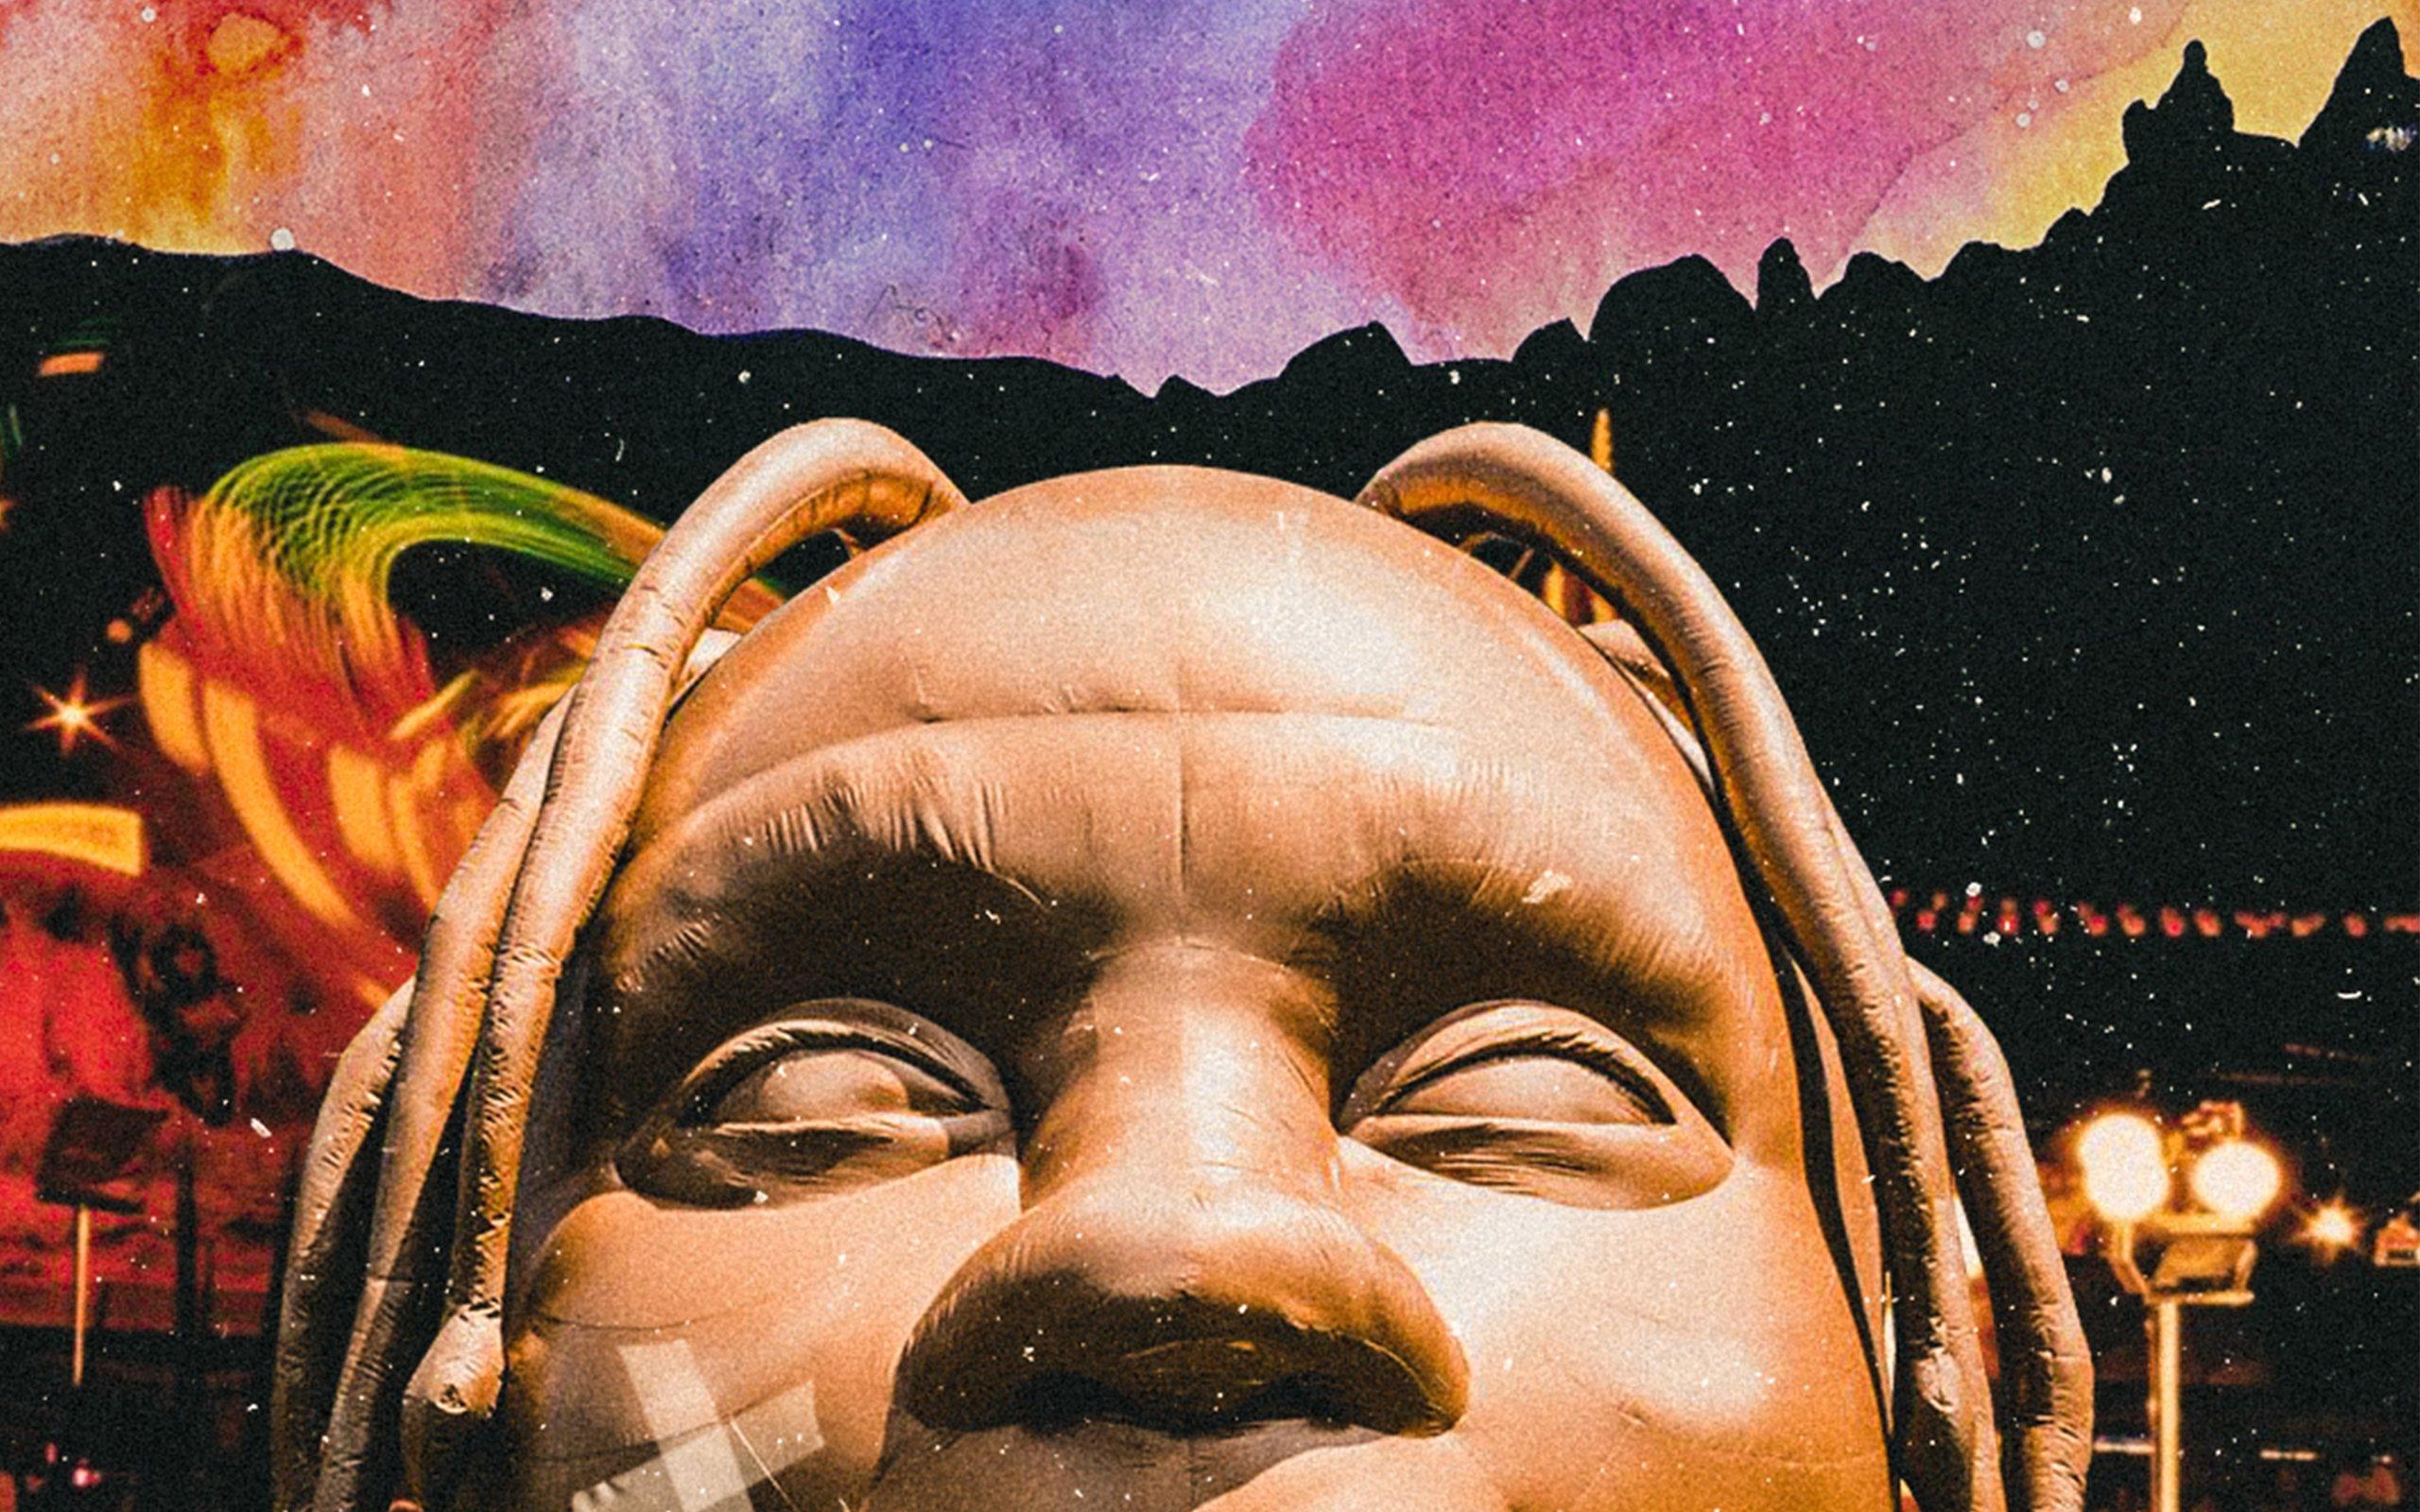 Another wallpaper for travis scott's astroworld courtesy